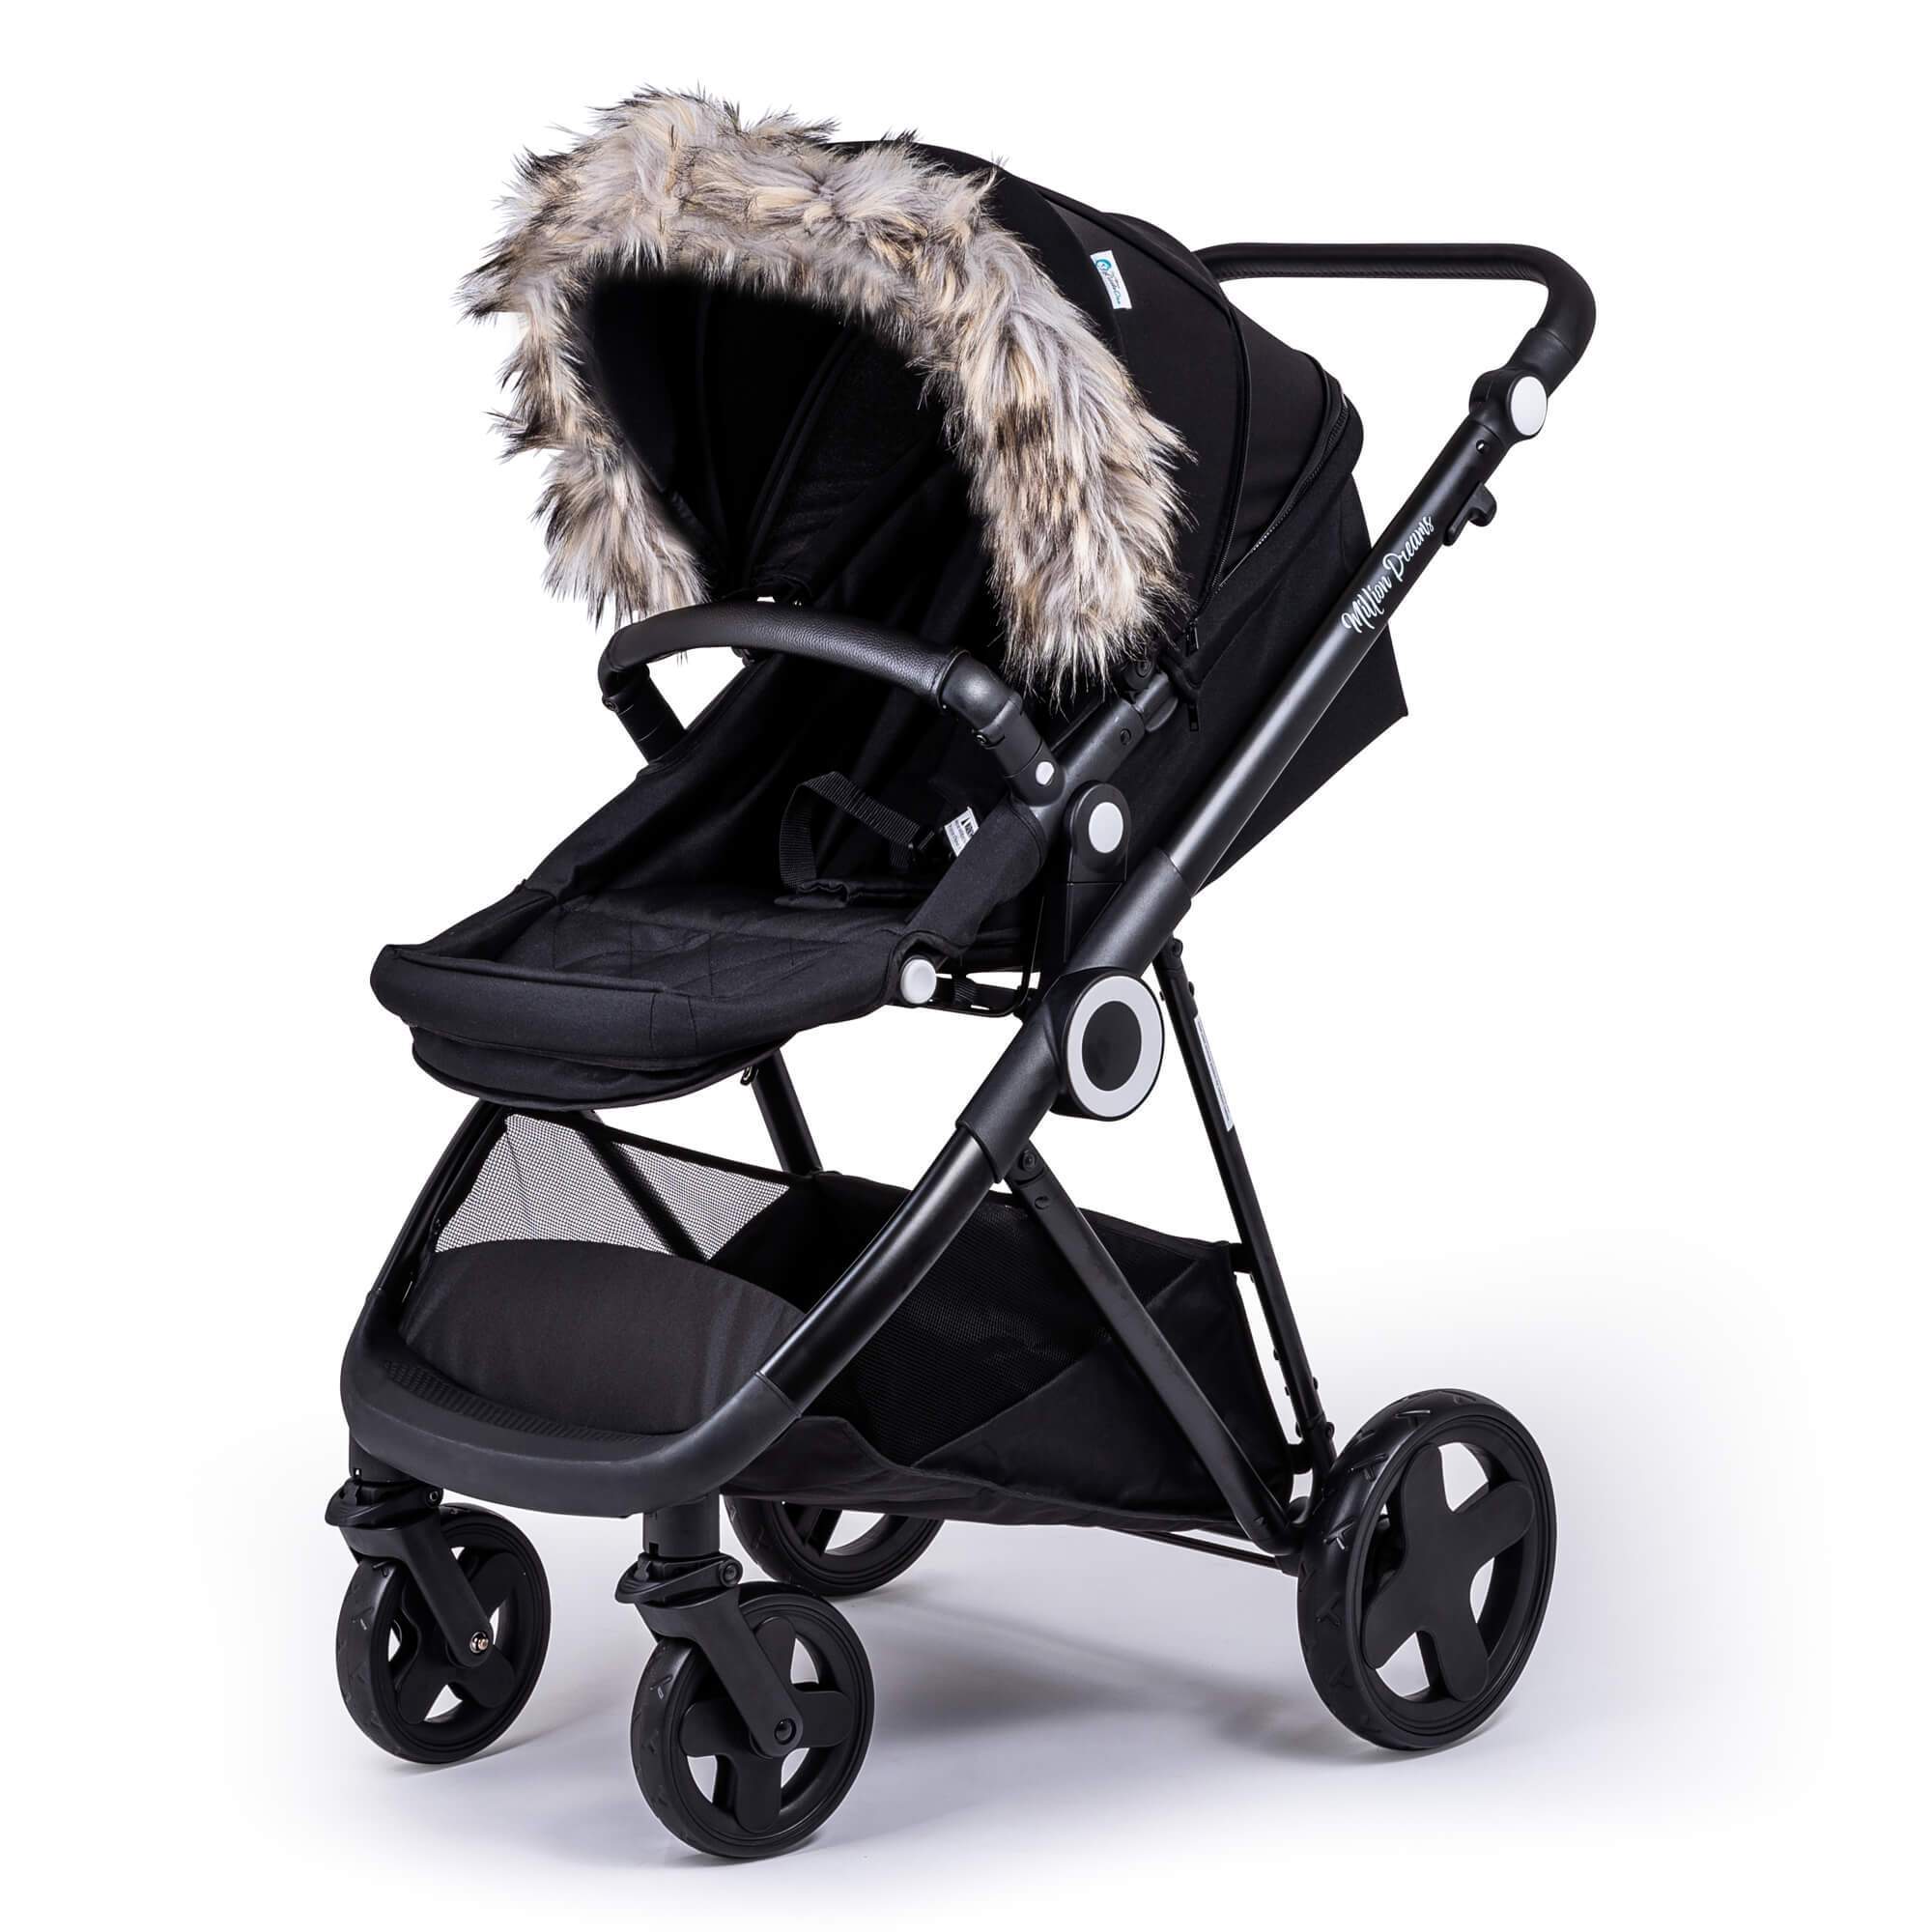 Pram Fur Hood Trim Attachment for Pushchair Compatible with BabiesRus - Light Grey / Fits All Models | For Your Little One